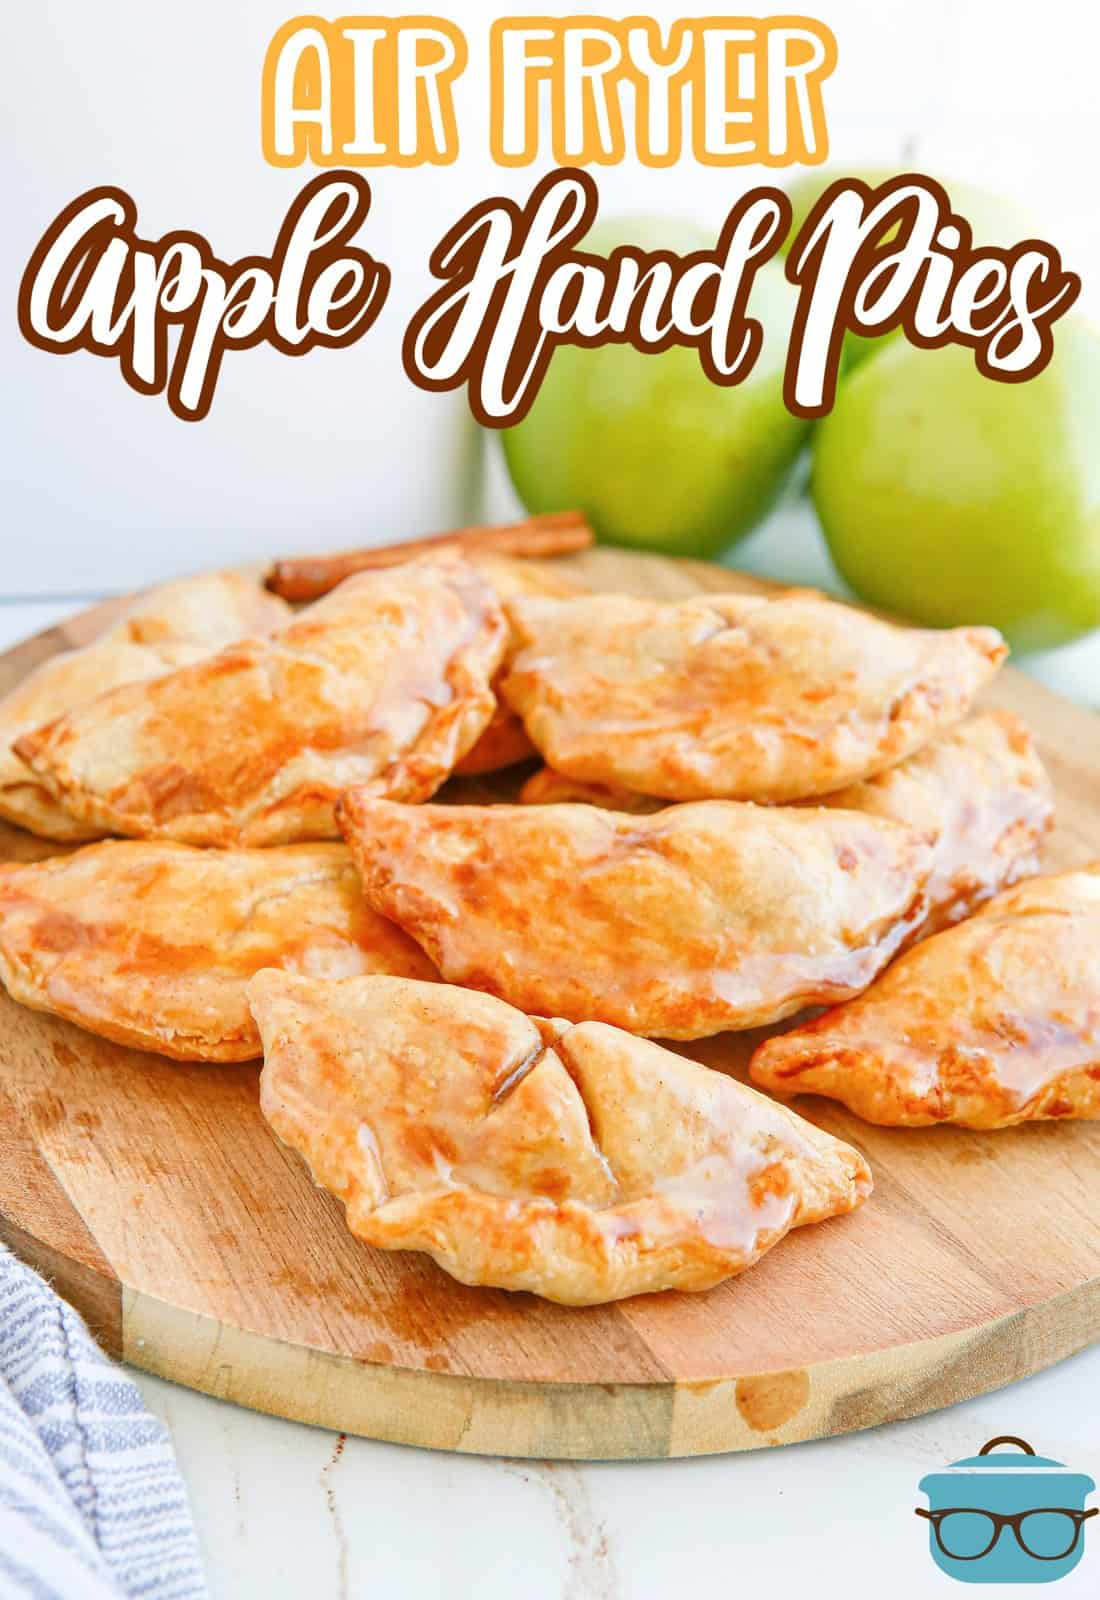 Pinterest image of Air Fryer Apple Hand Pies on wooden board glazed.